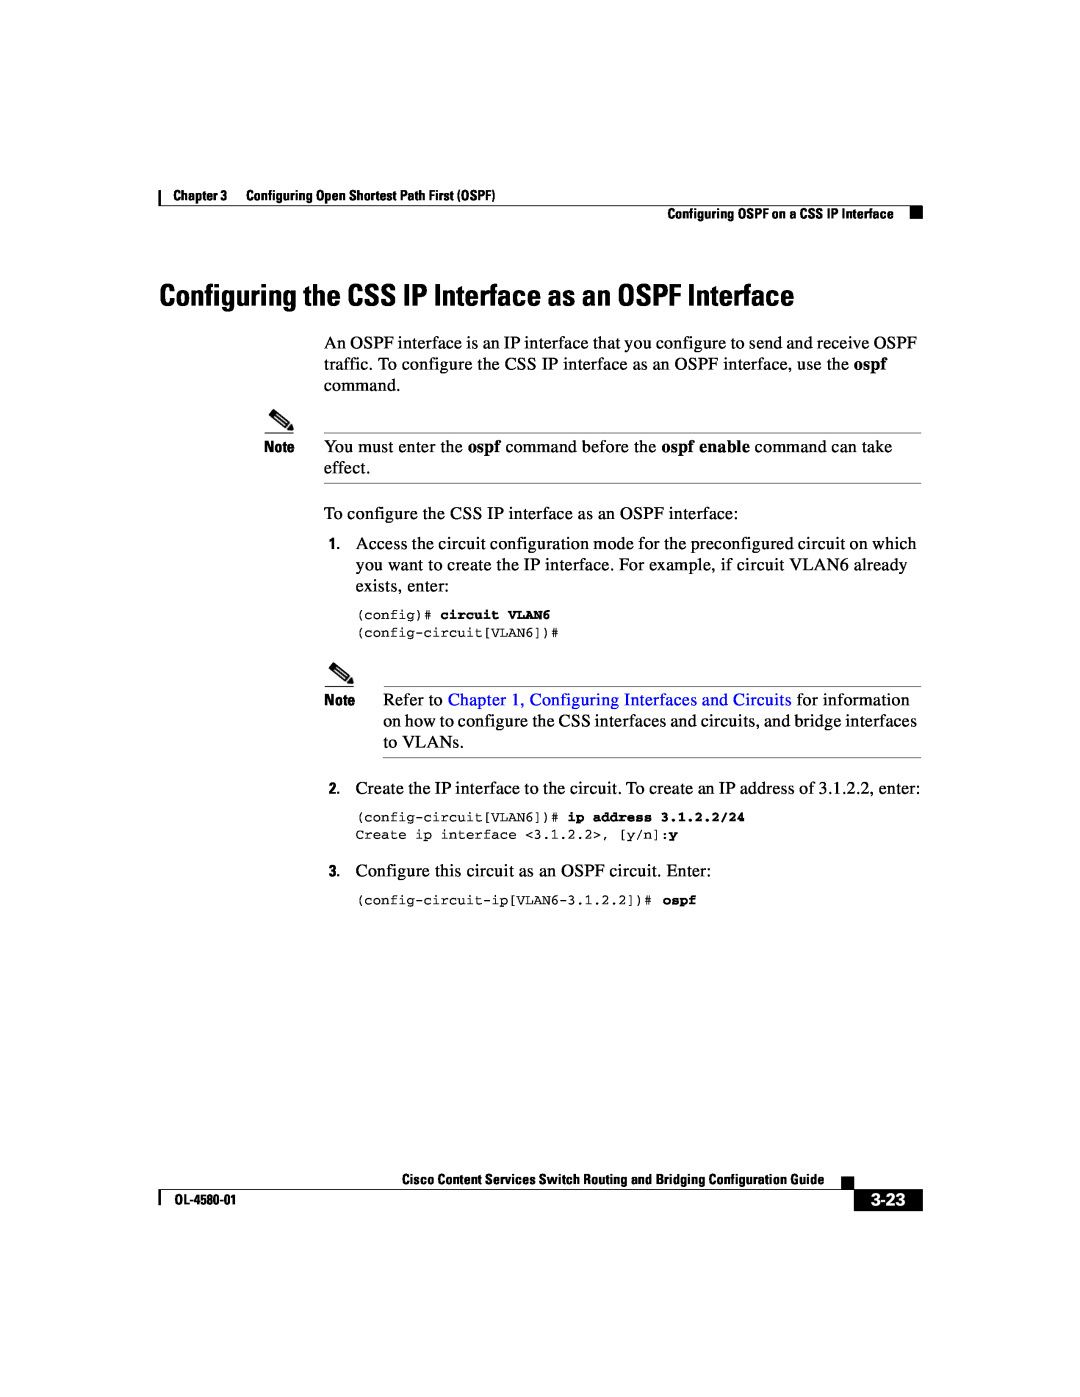 Cisco Systems OL-4580-01 manual Configuring the CSS IP Interface as an OSPF Interface, 3-23 